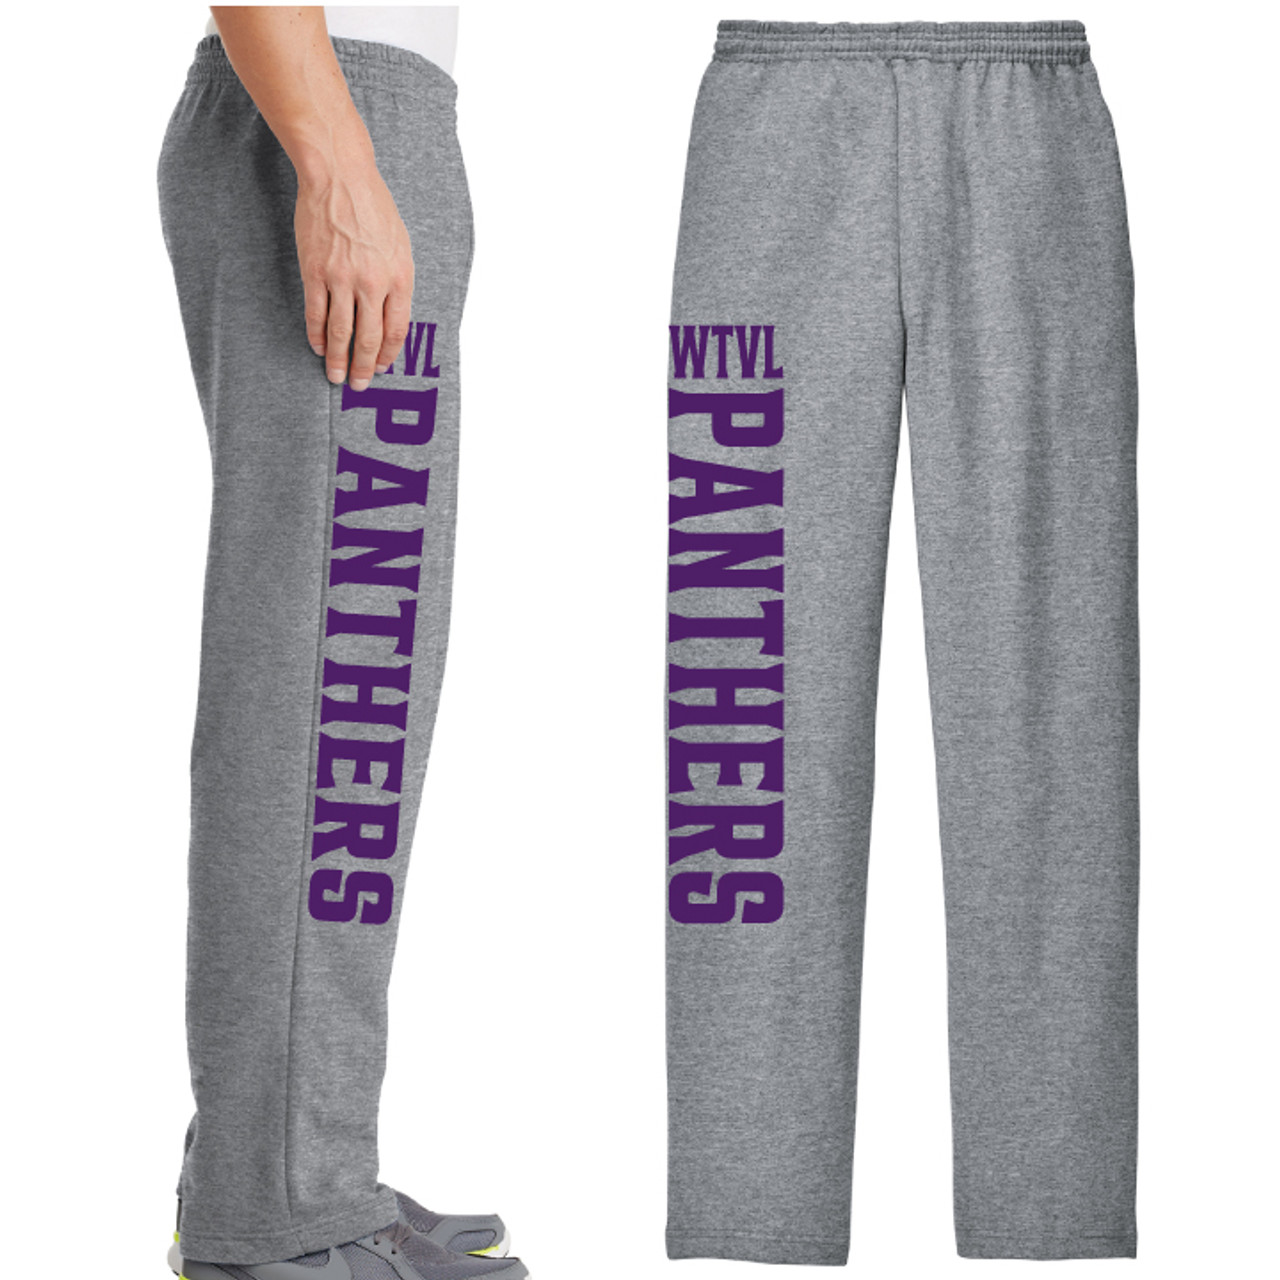 WTLV Panthers - Heather Gray Open Bottom Sweatpants in Adult sizes - Puddle  Bear